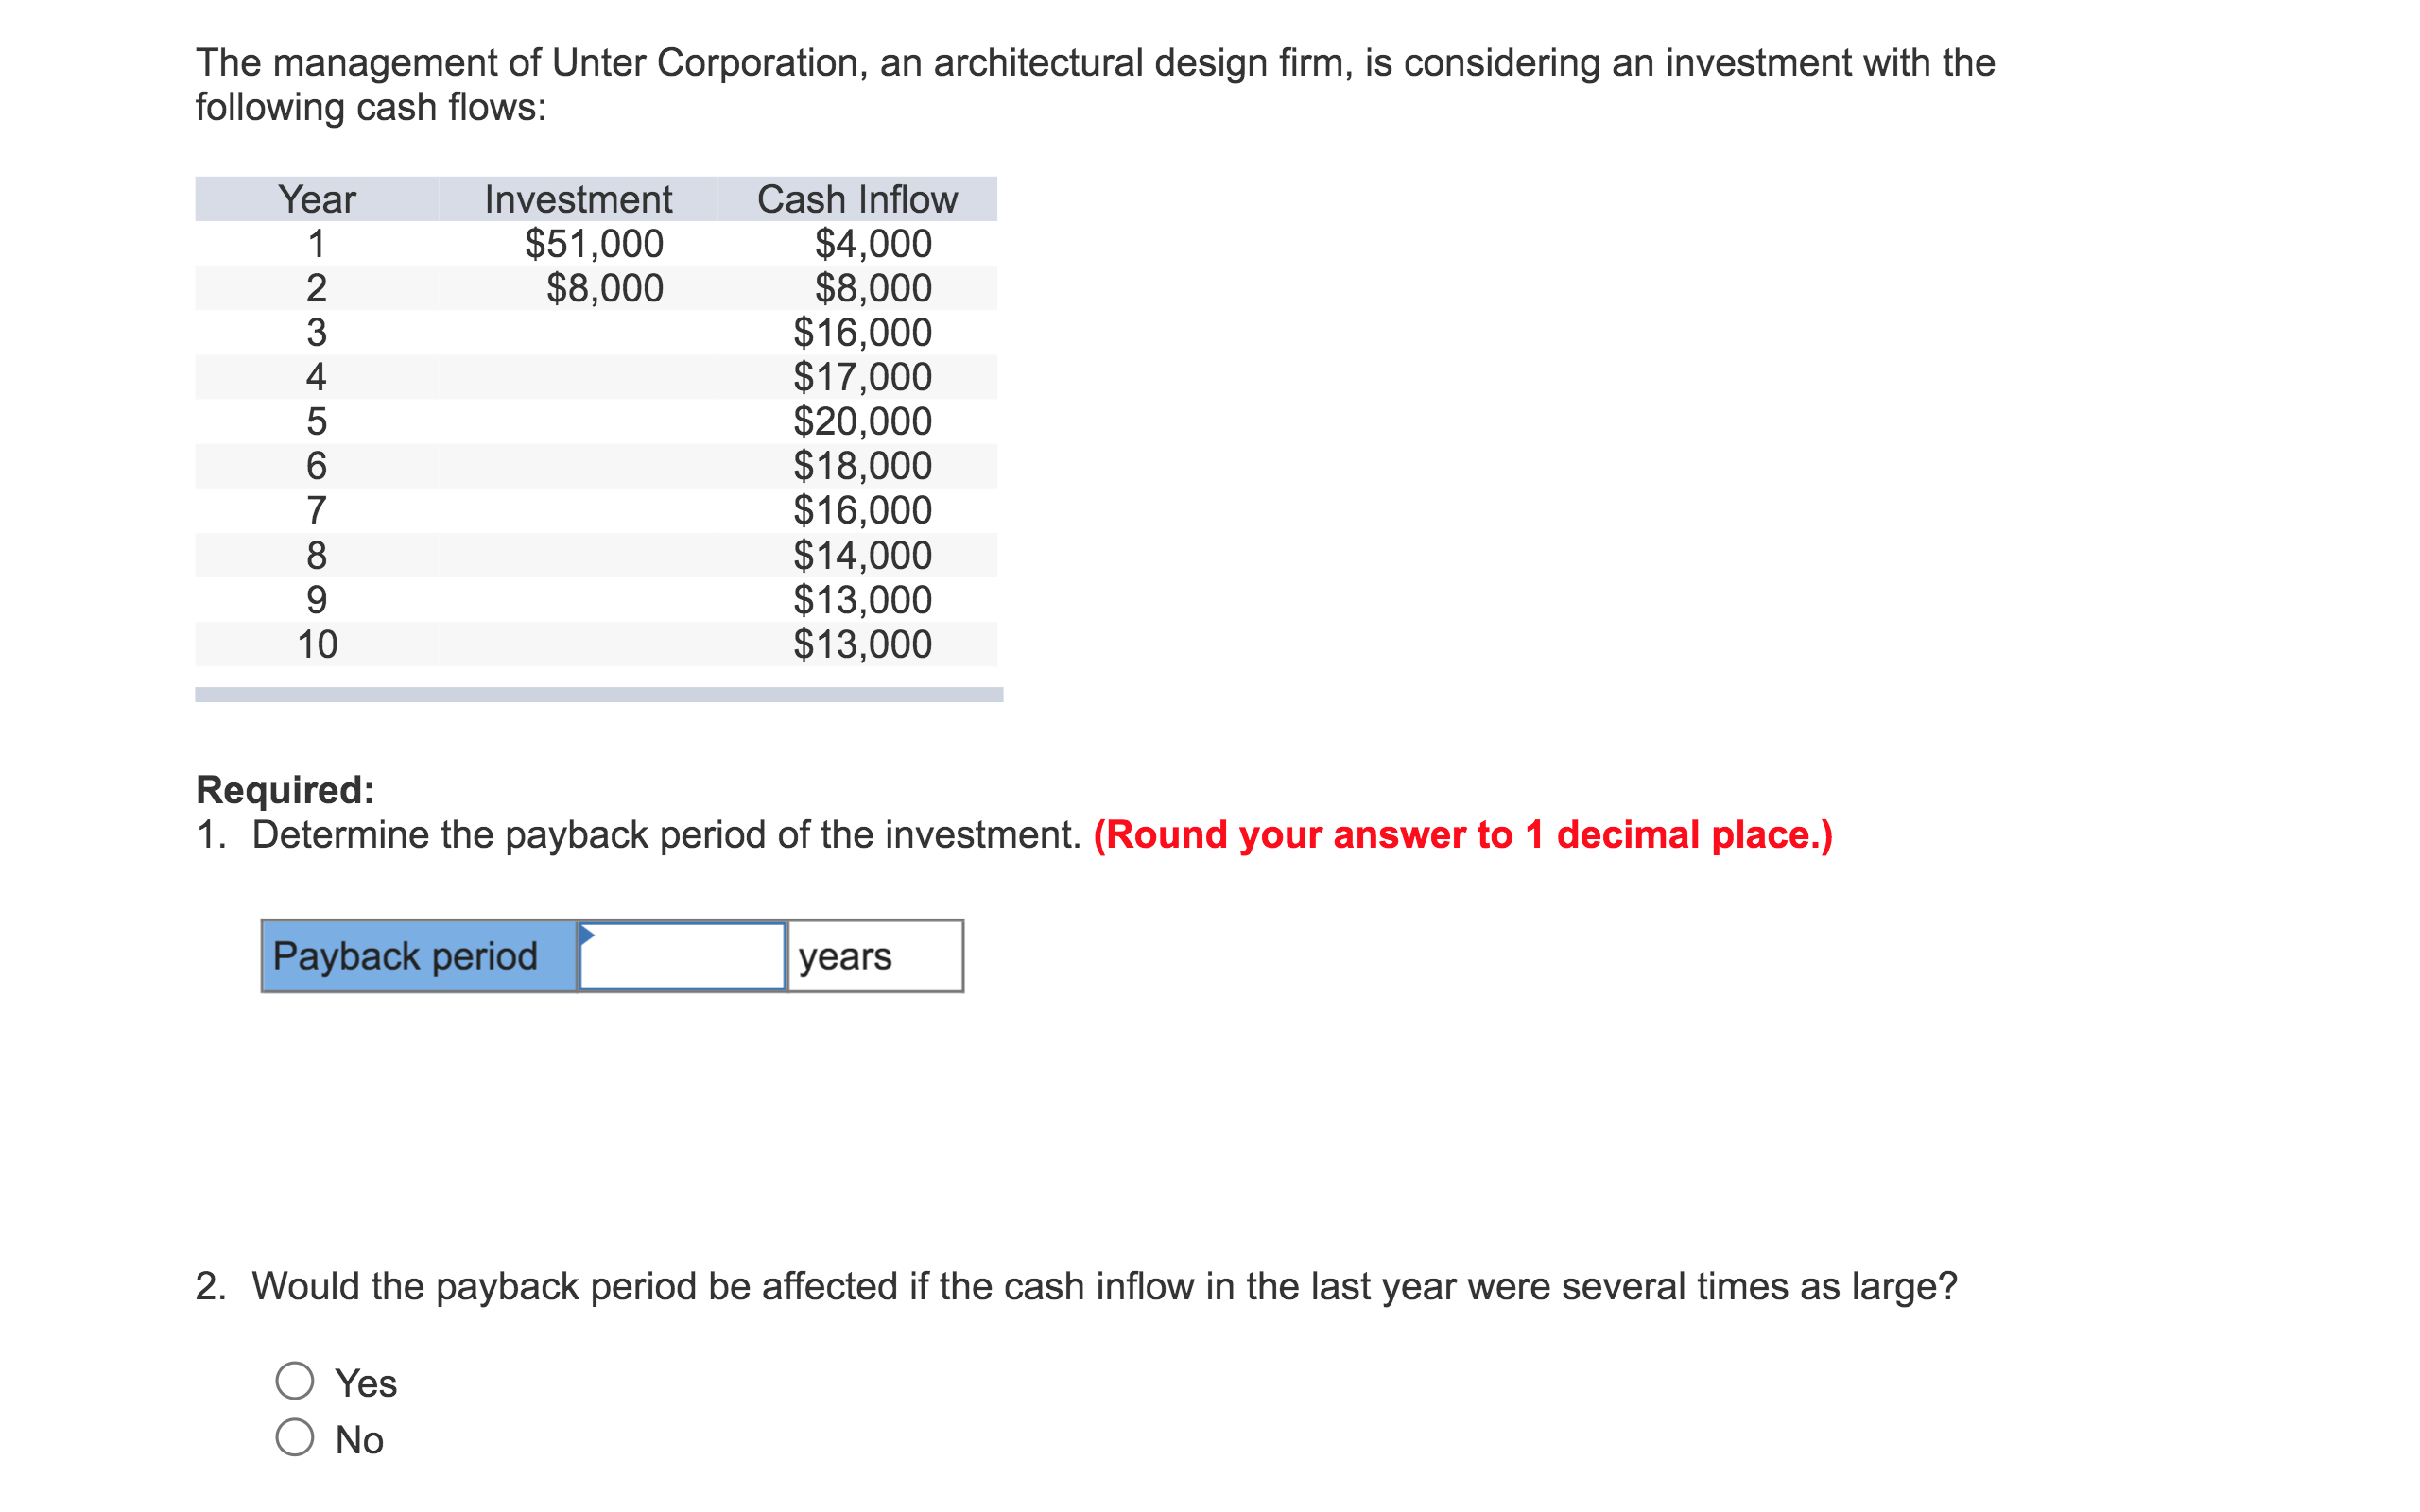 The management of Unter Corporation, an architectural design firm, is considering an investment with the
following cash flows:
Year
Investment
Cash Inflow
$51,000
$8,000
$4,000
$8,000
$16,000
$17,000
$20,000
$18,000
$16,000
$14,000
$13,000
$13,000
1
2
3
4
7
8
9
10
Required:
1. Determine the payback period of the investment. (Round your answer to 1 decimal place.)
Payback period
years
2. Would the payback period be affected if the cash inflow in the last year were several times as large?
Yes
O No
